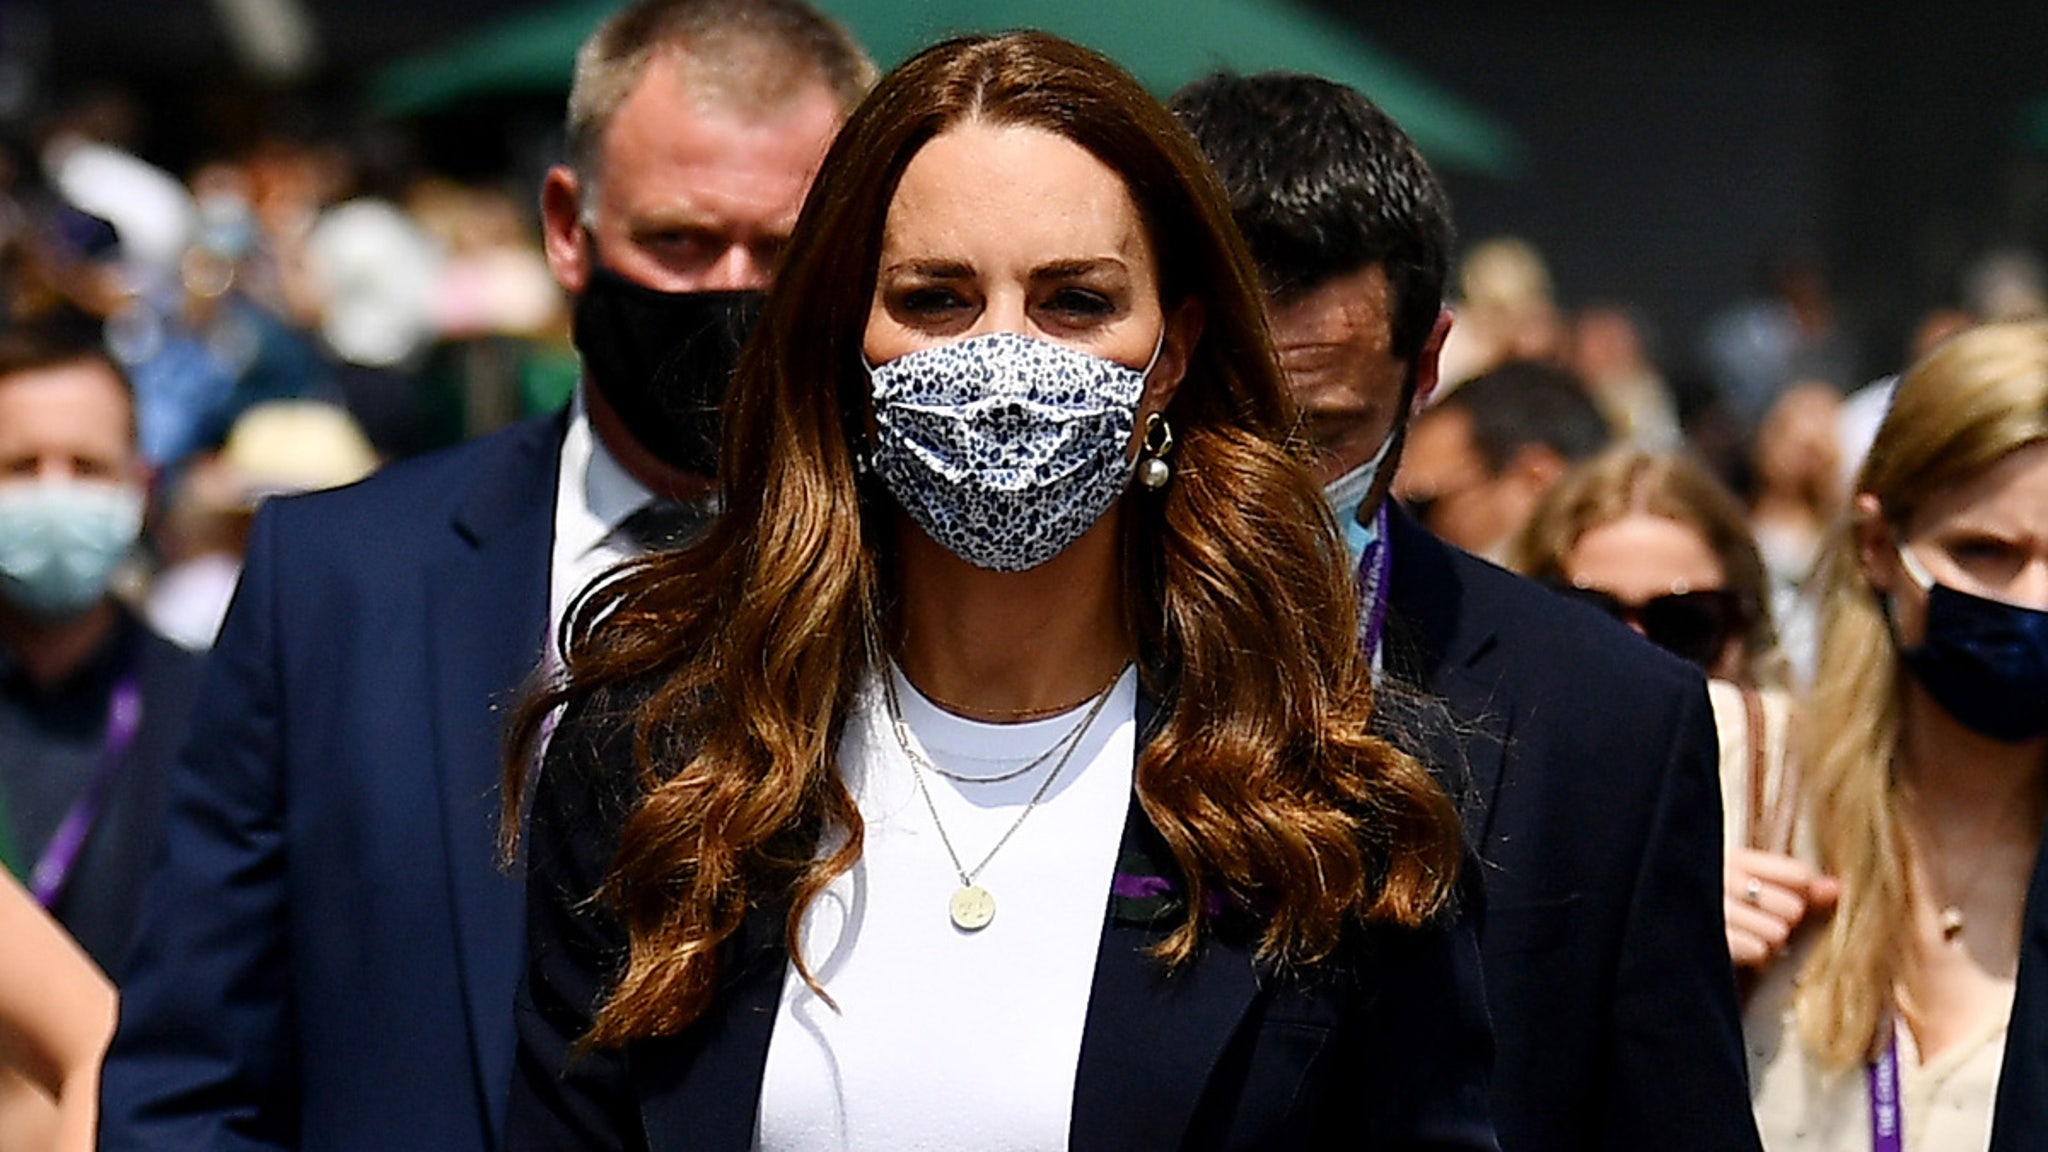 Kate Middleton Quarantining After COVID Contact